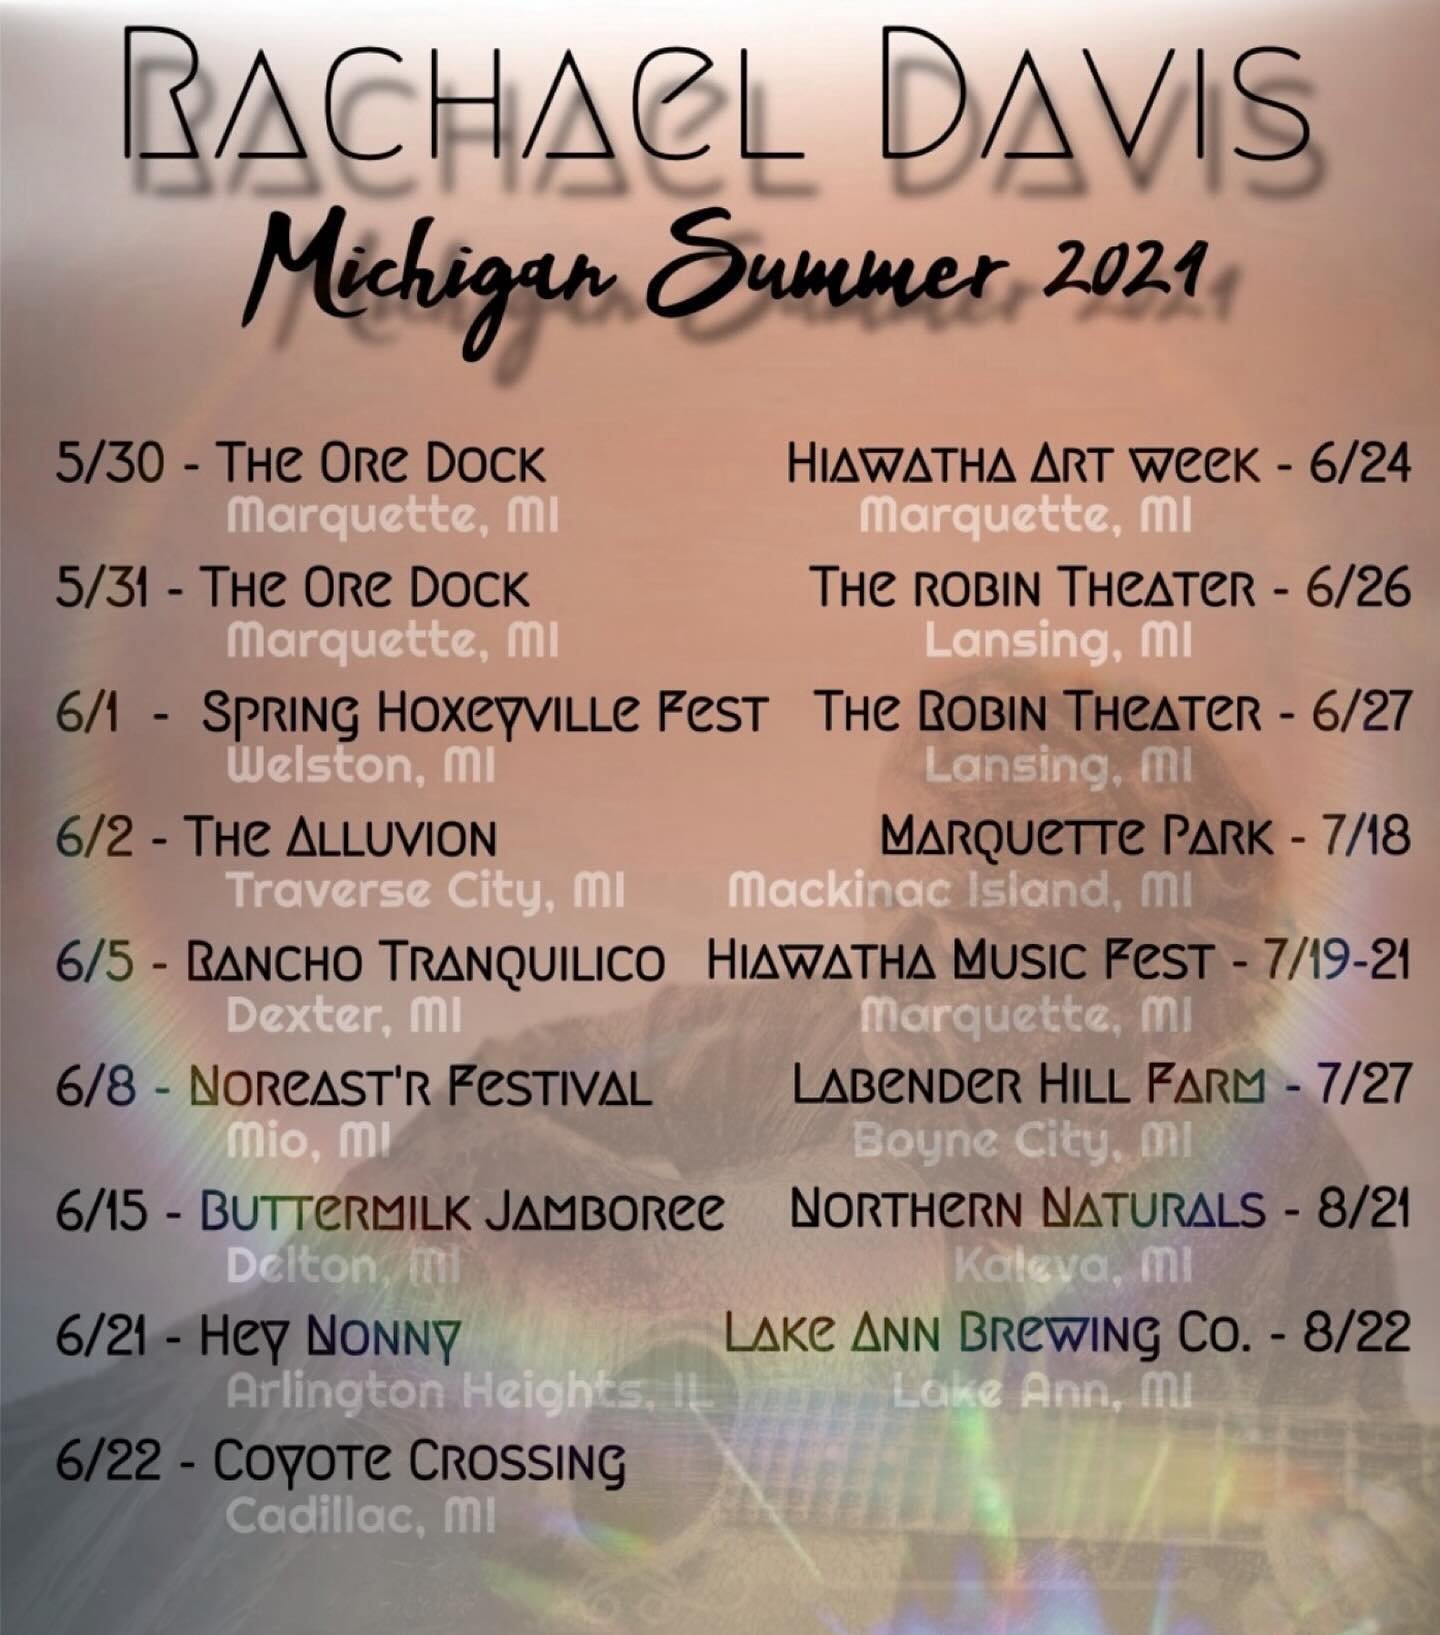 Hello again! 

I&rsquo;ve had enough time to decompress from the April shows to get back in the home routine just in time for summer start! It&rsquo;s gonna be action packed I get to spend almost the entirety in the Great Lakes area&hellip; I kinda p